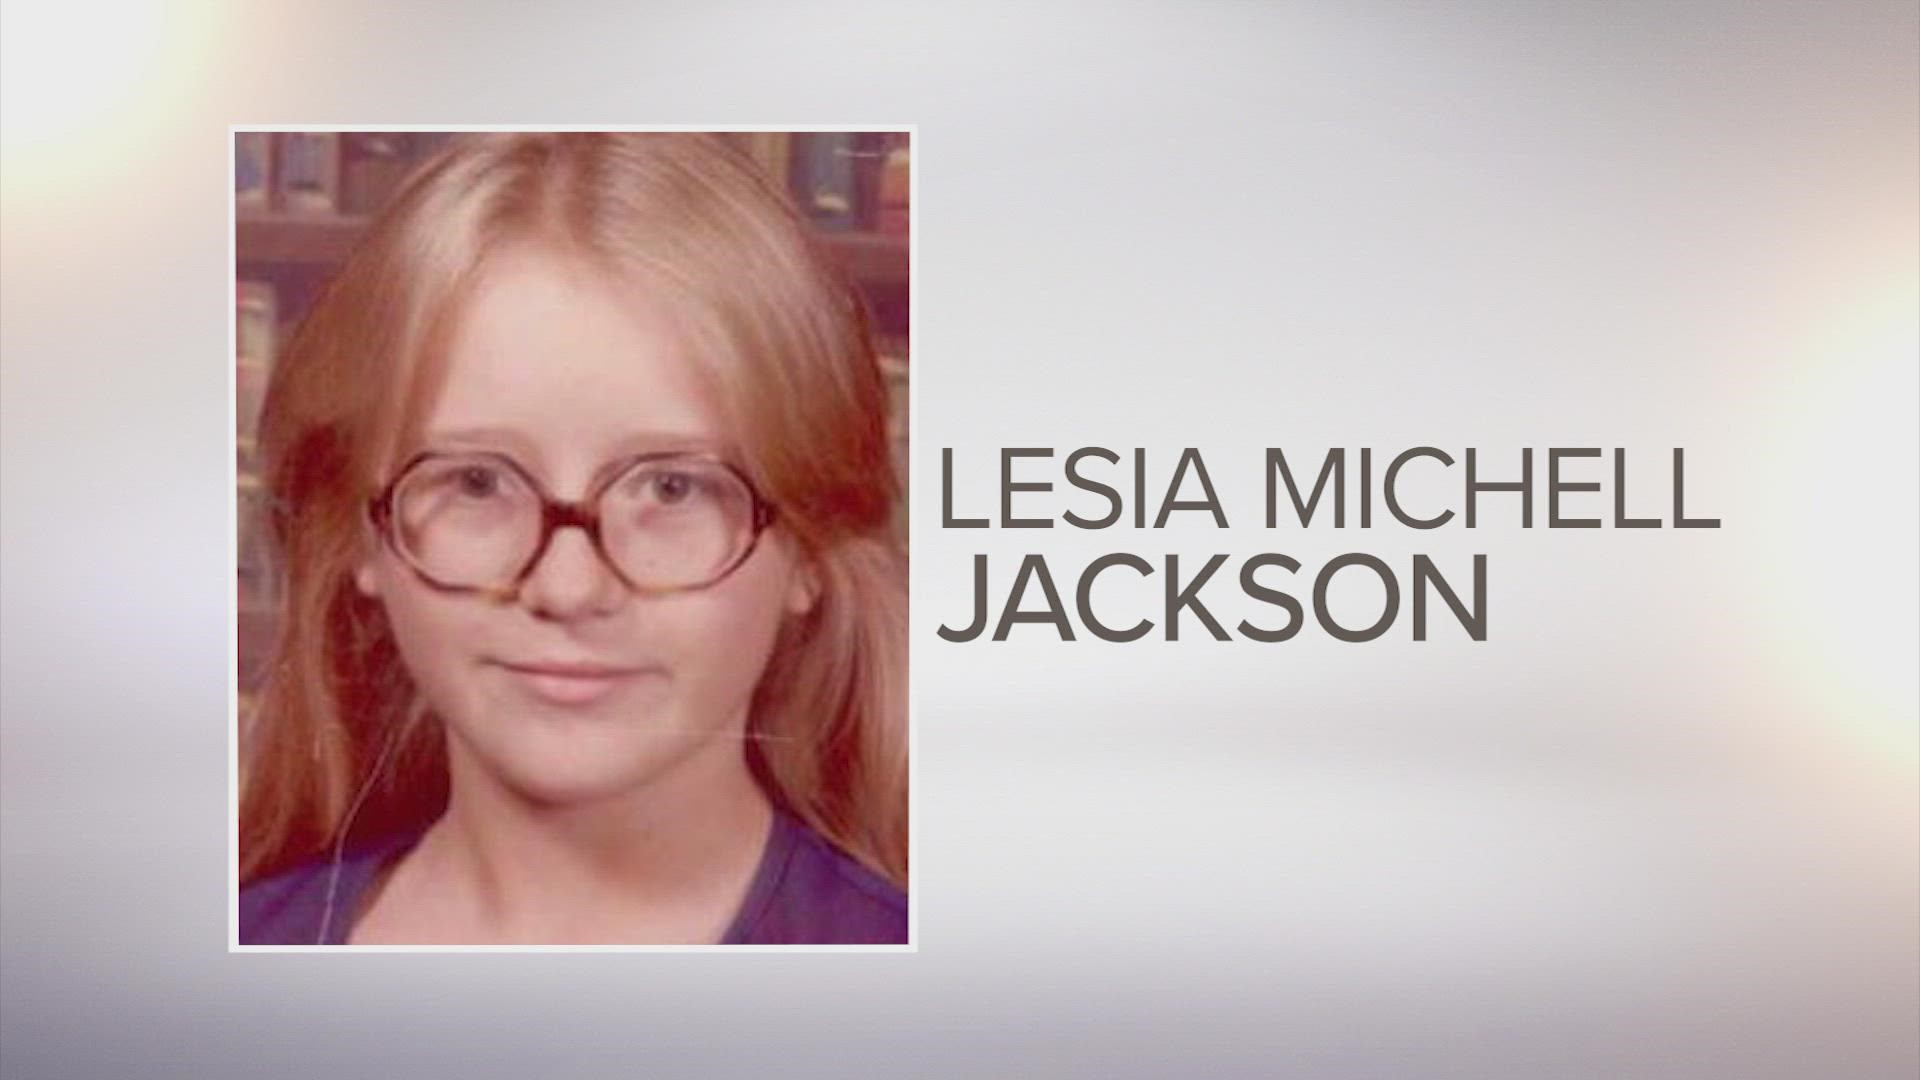 Lesia Mitchell Jackson was kidnapped, sexually assaulted and murdered in 1979. Her kidnapper was executed more than 20 years later for another murder.